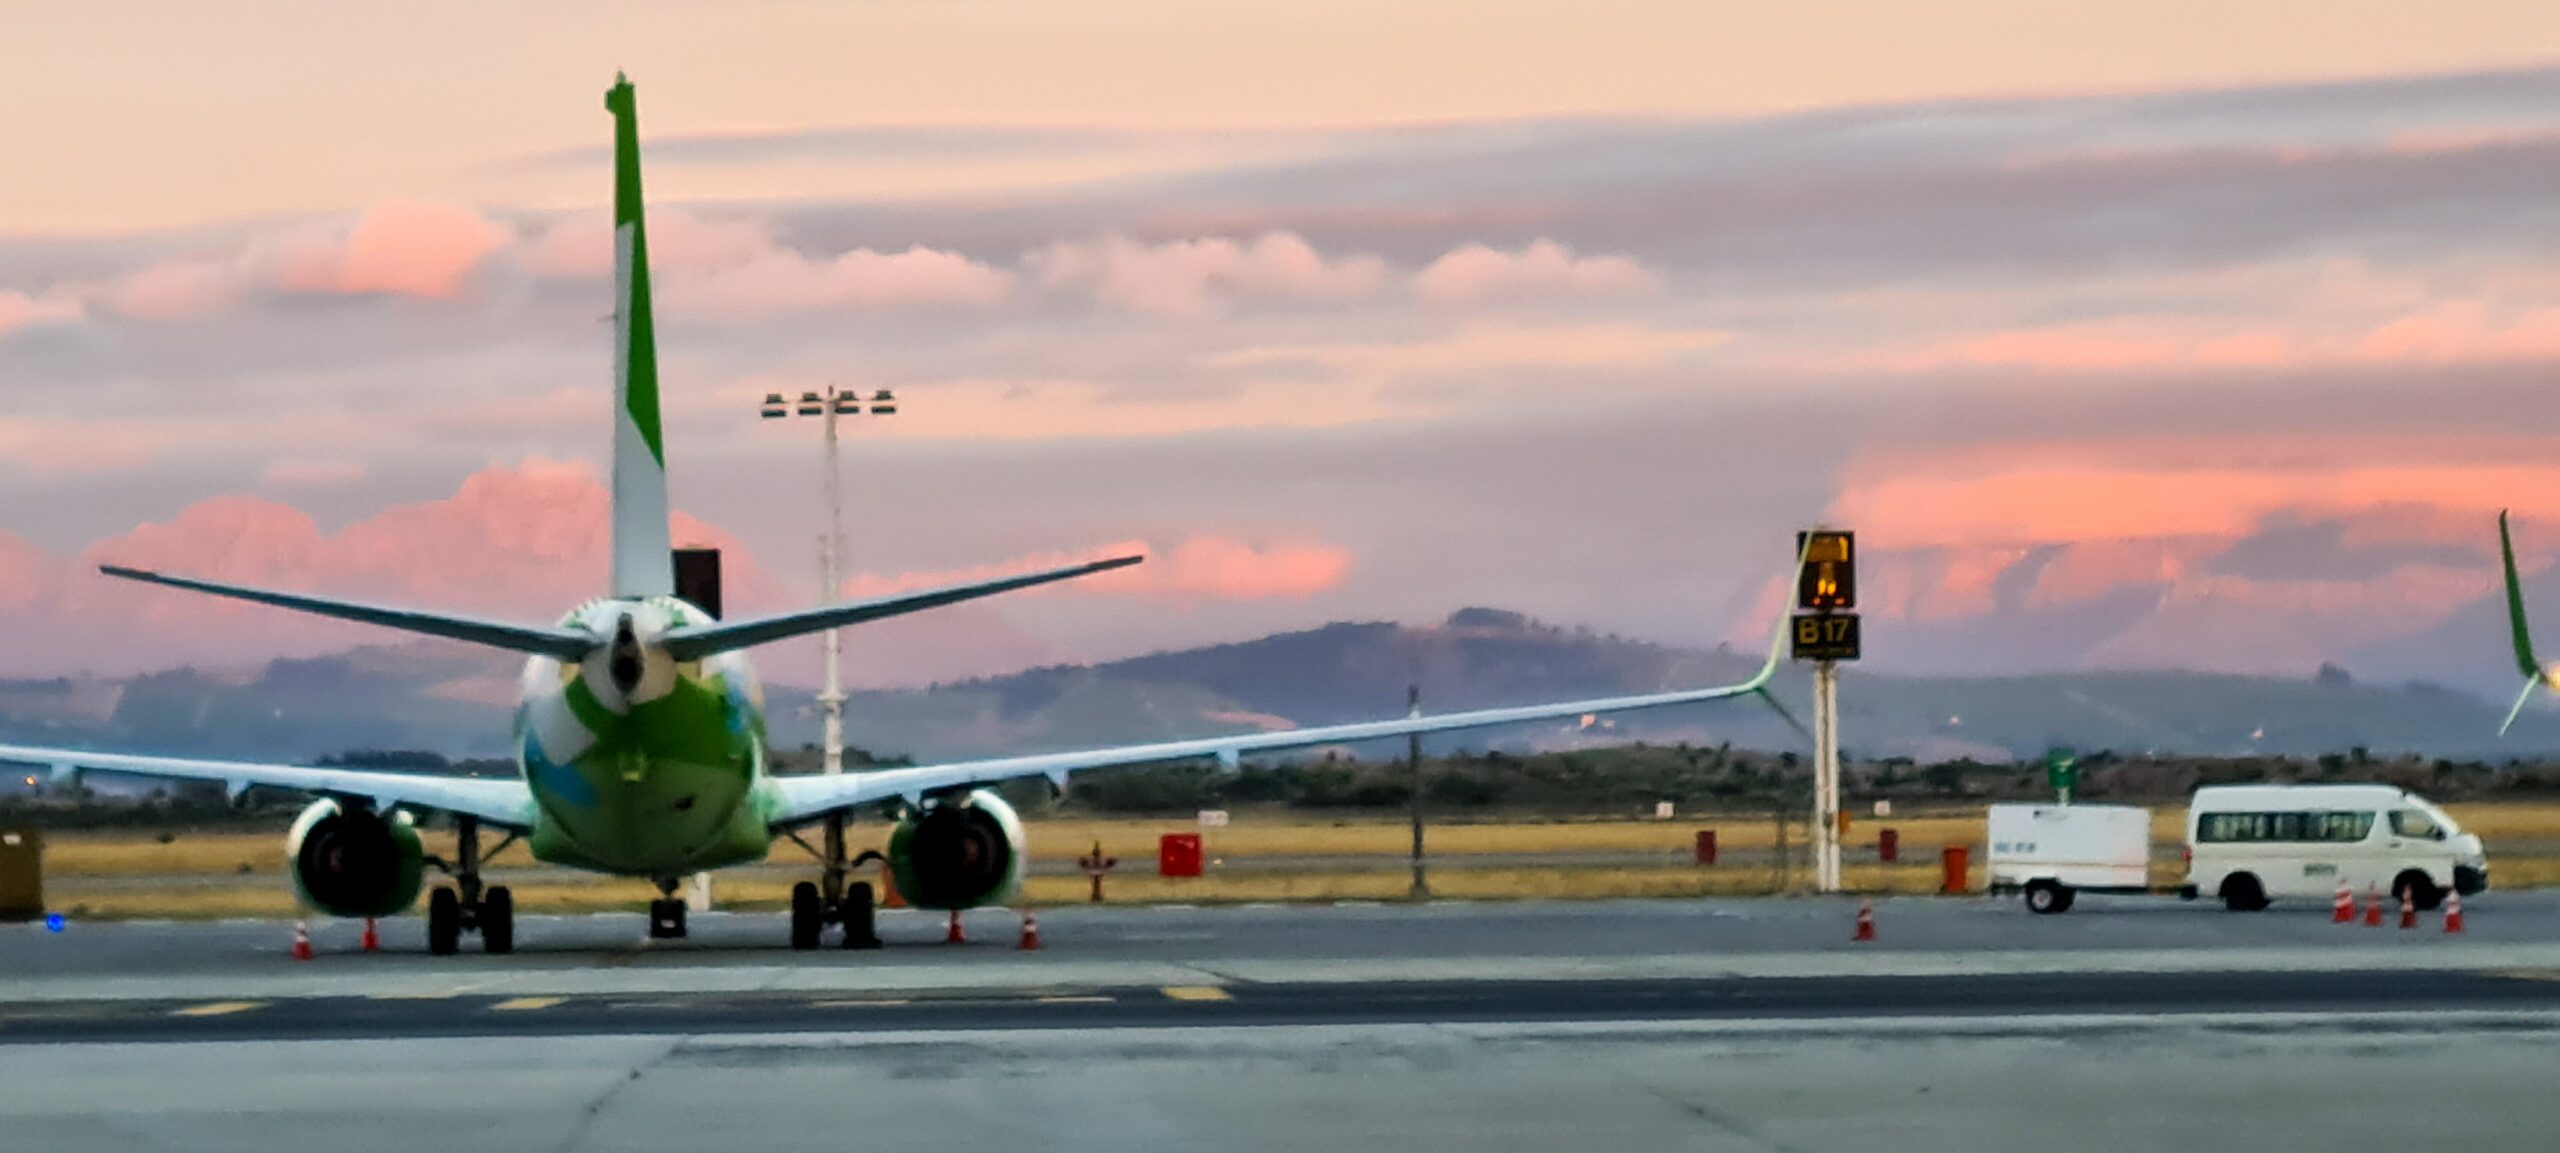 Rear view of a parked aeroplane at Cape Town Airport